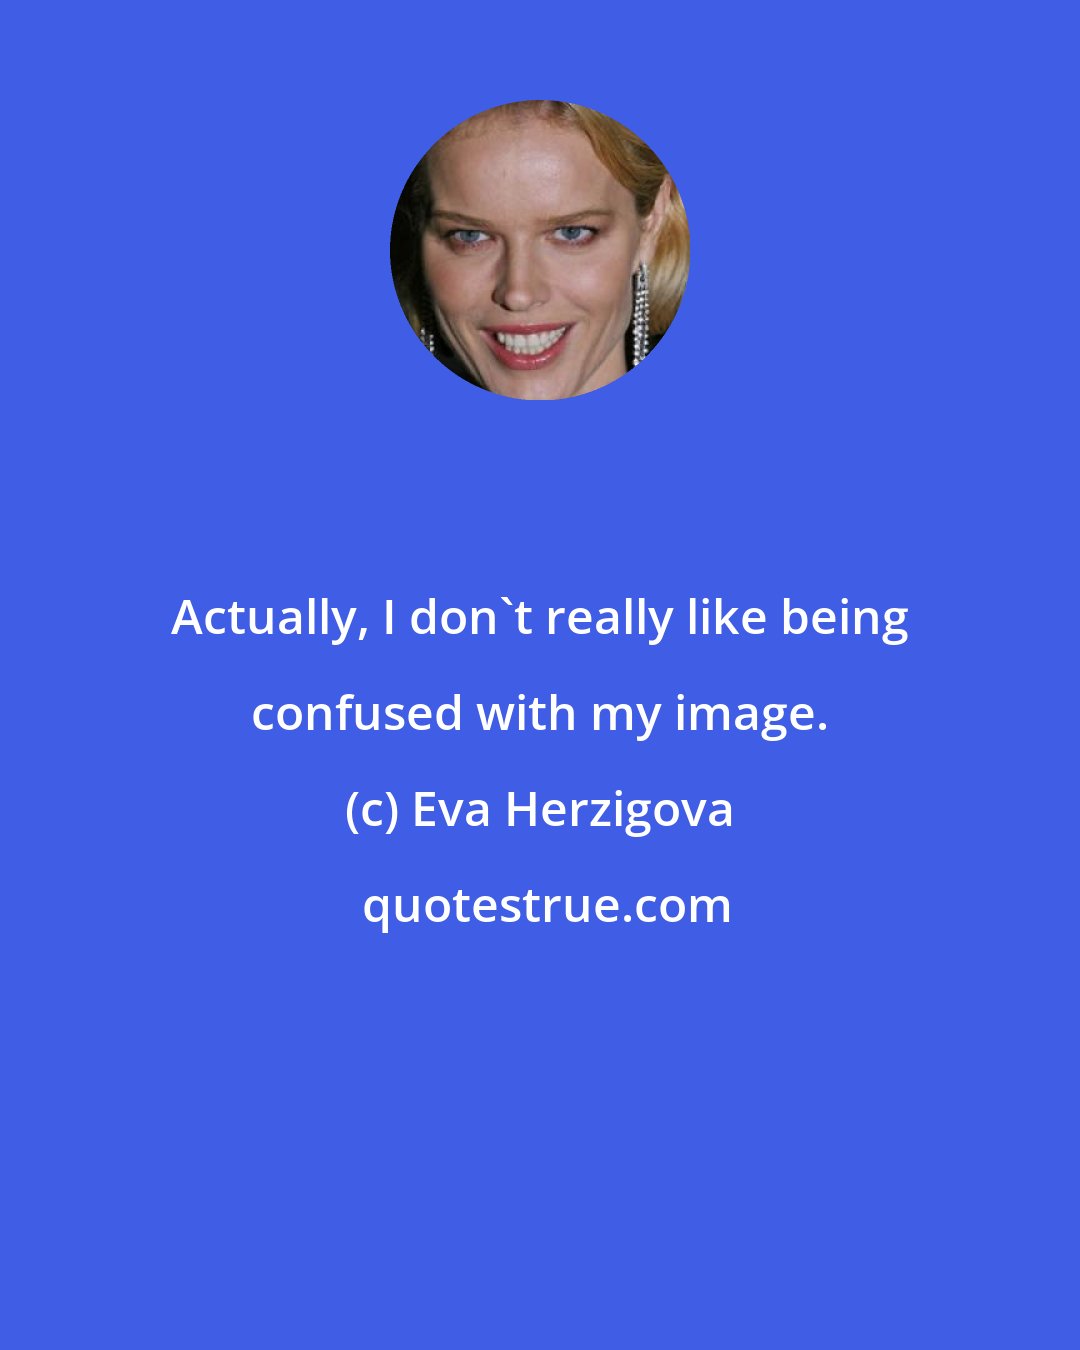 Eva Herzigova: Actually, I don't really like being confused with my image.